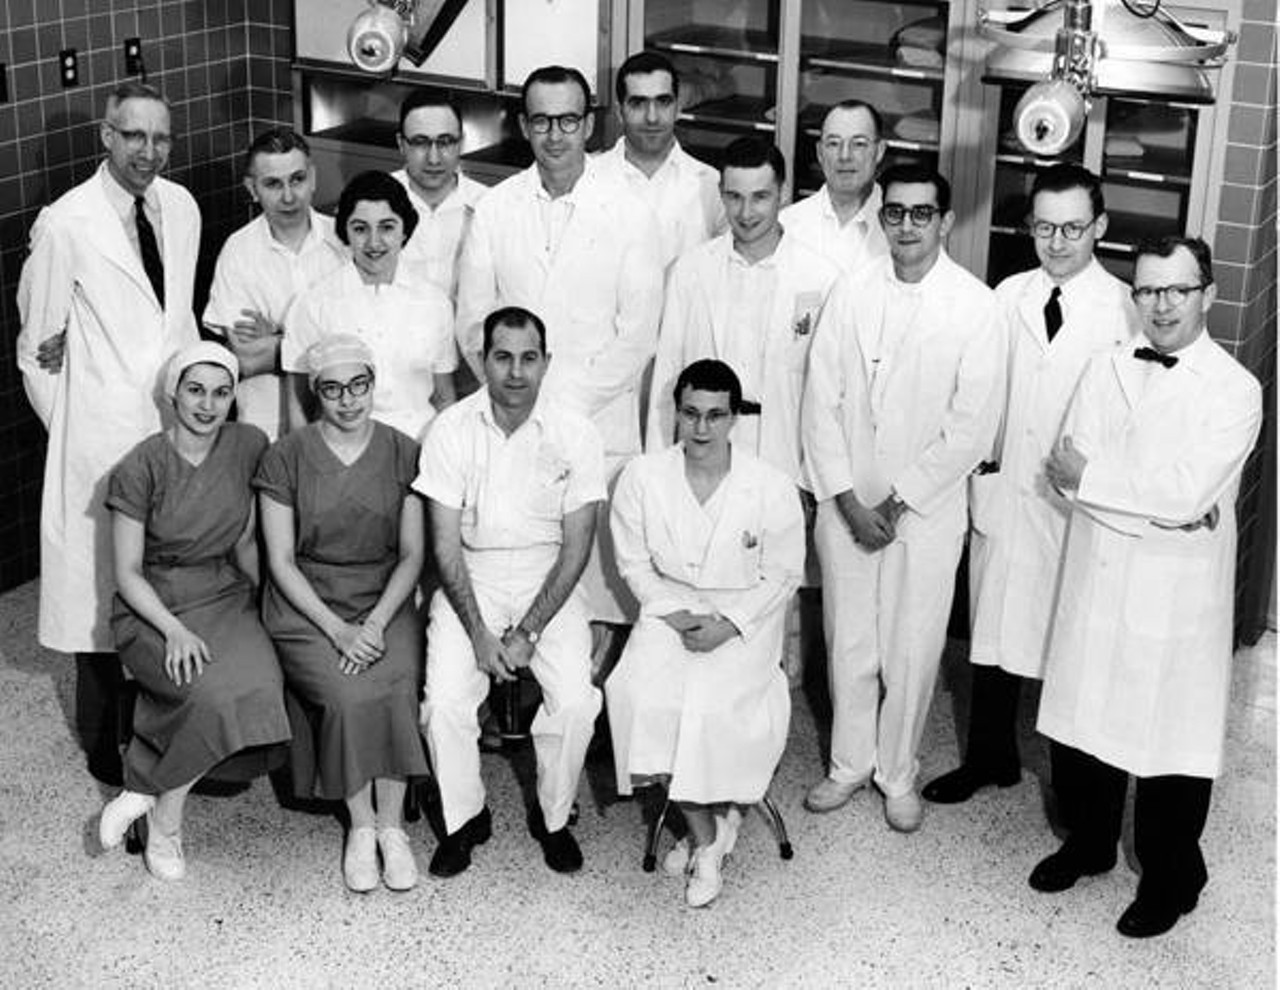  Team of Clinic Nurses and Doctors who Participated in Cleveland's First Stopped Heart Surgery, 1956 